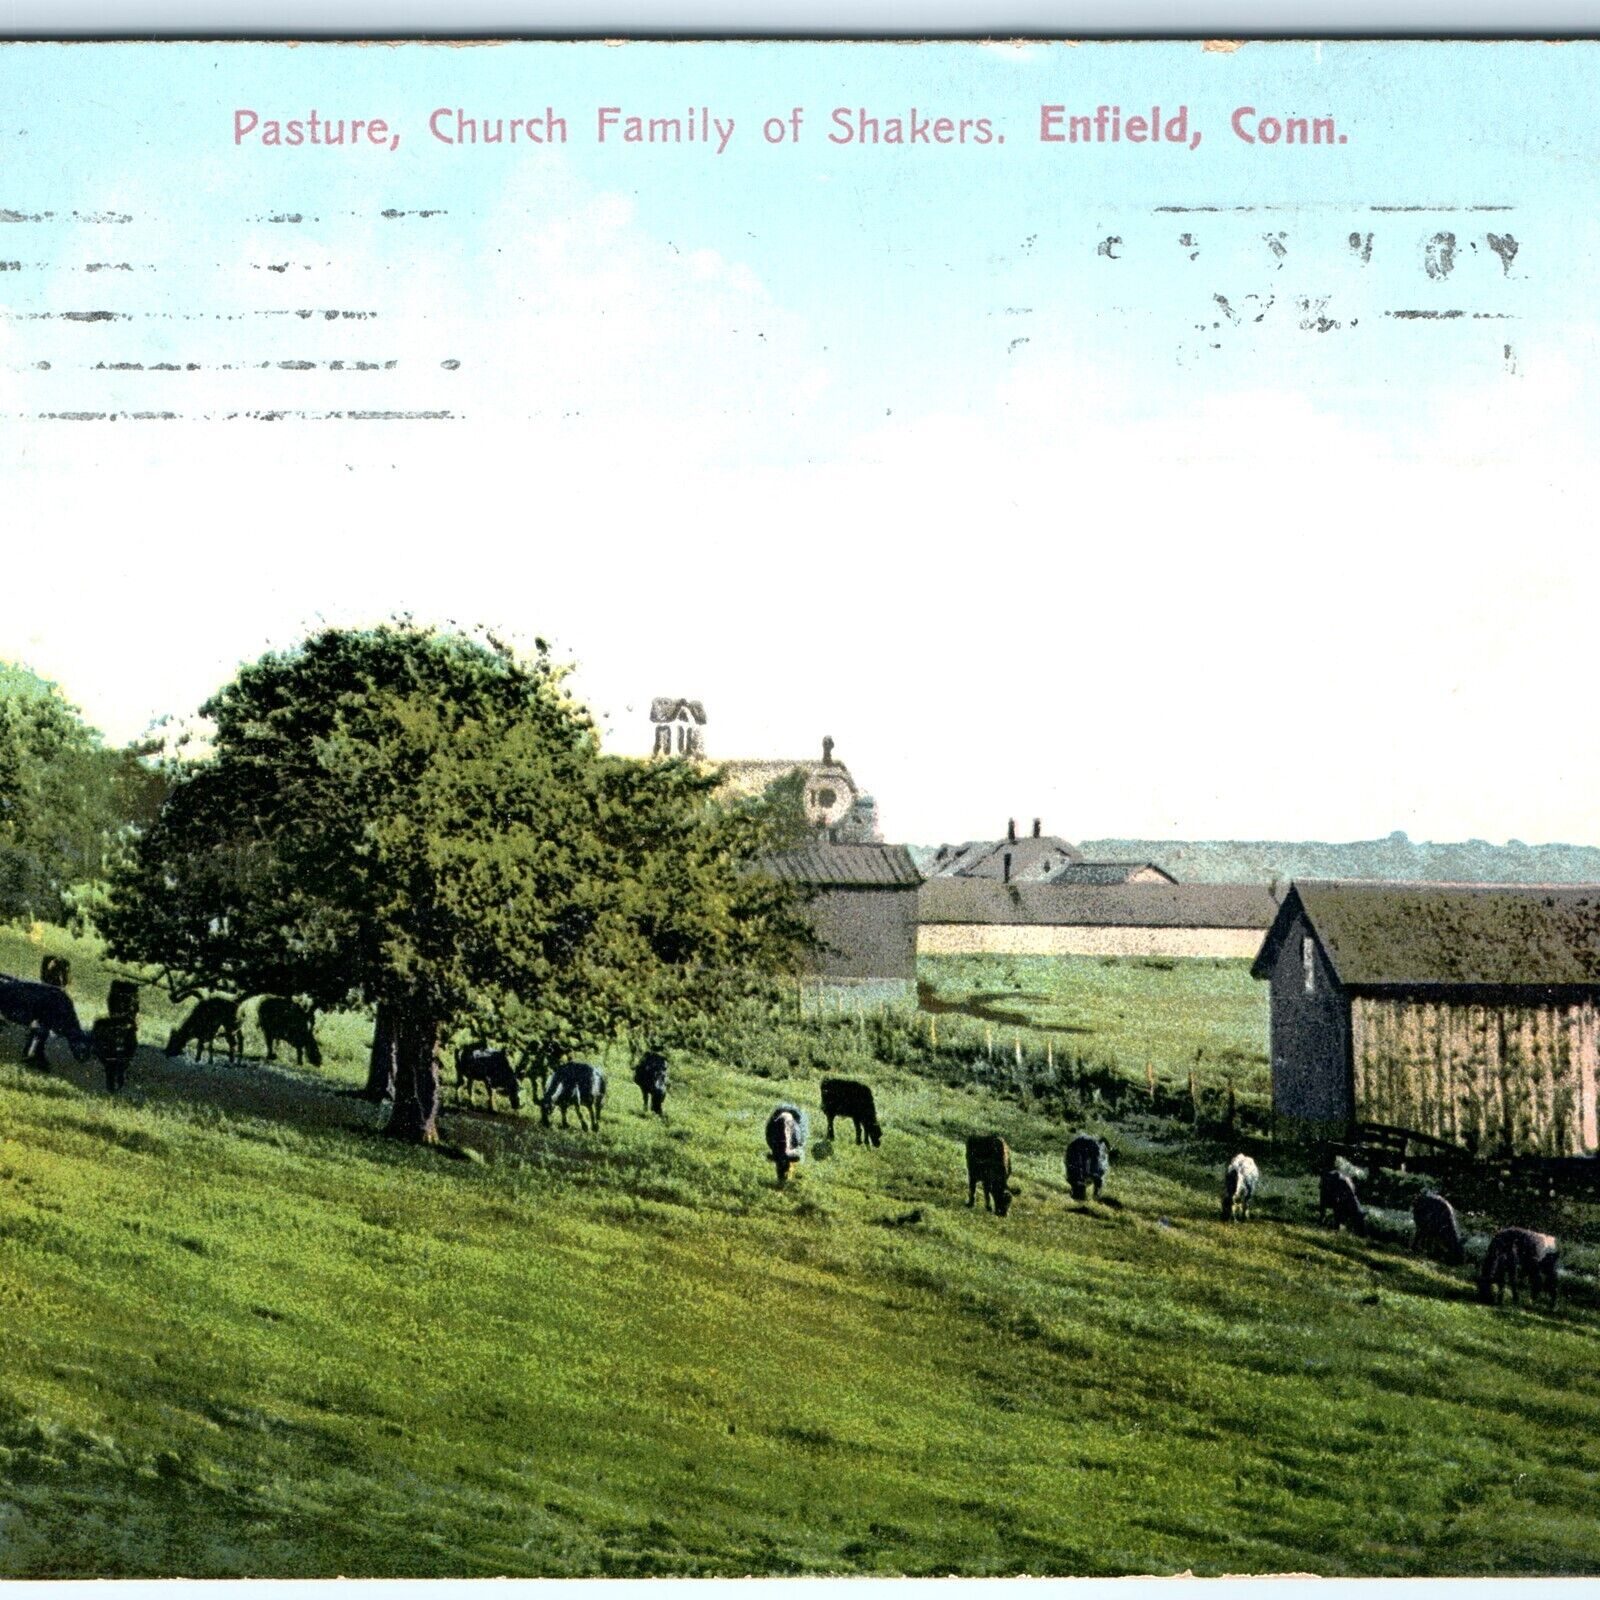 c1910s Enfield, Conn Pasture, Church Family Shakers Lovely Farm Postcard CT A102